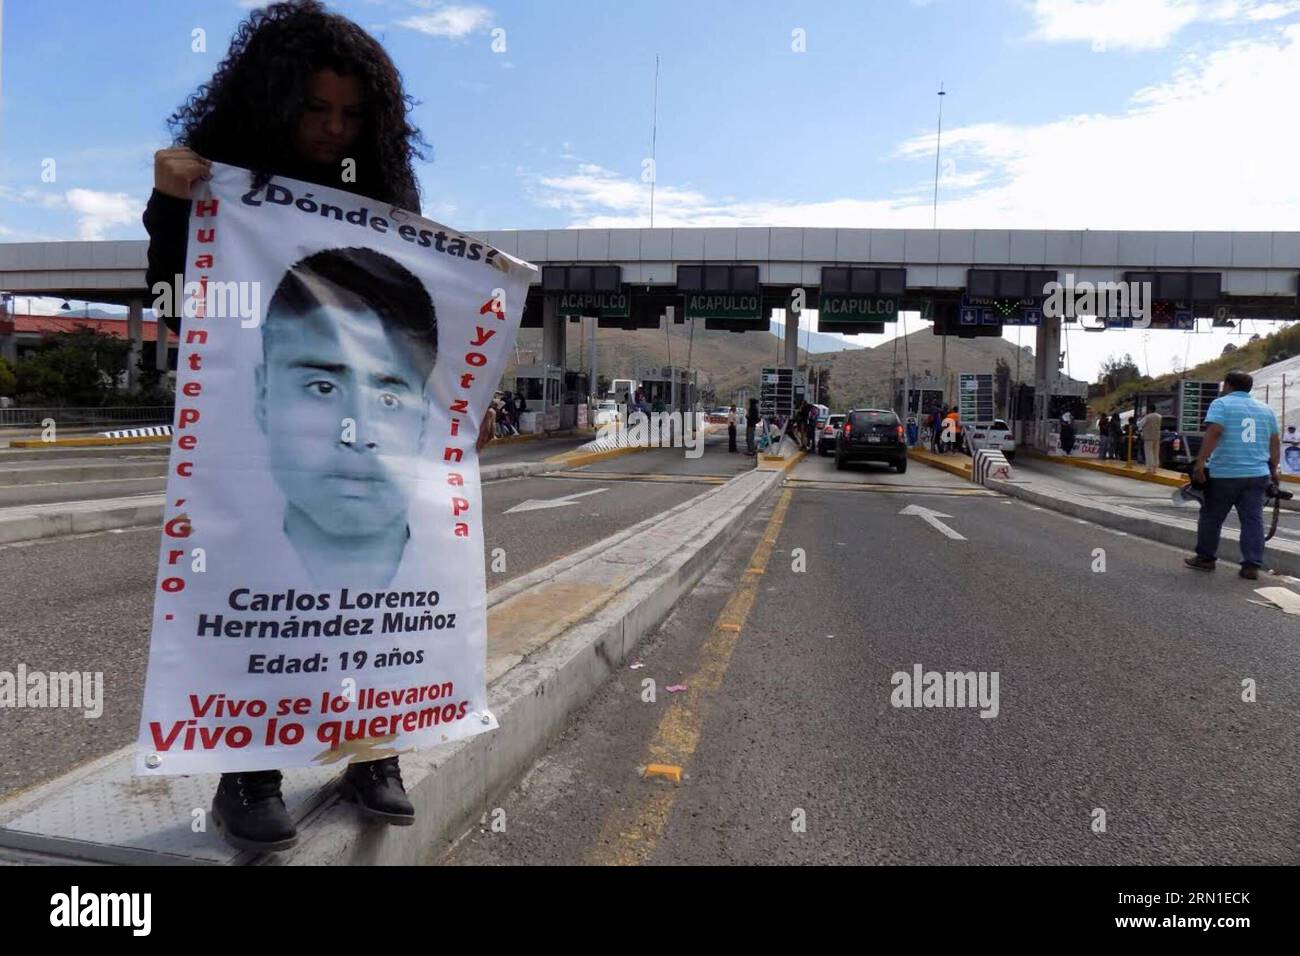 (141224) -- GUERRERO, Dec. 23, 2014 -- A person holds a sign during a demonstration in the tollbooth of the comunity of Palo Blanco, to 3km from Chilpancingo, capital of the state of Guerrero, Mexico, on Dec. 23, 2014. Normalists an parents held a demonstration to demand the live appearance of the missing students of Normal Rural School Raul Isidro Burgos of Ayotzinapa where also requested the support of the people for their cause. ) (jp) MEXICO-GUERRERO-SOCIETY-DEMONSTRATION EdgarxdexJesusxEspinoza PUBLICATIONxNOTxINxCHN   Guerrero DEC 23 2014 a Person holds a Sign during a Demonstration in T Stock Photo